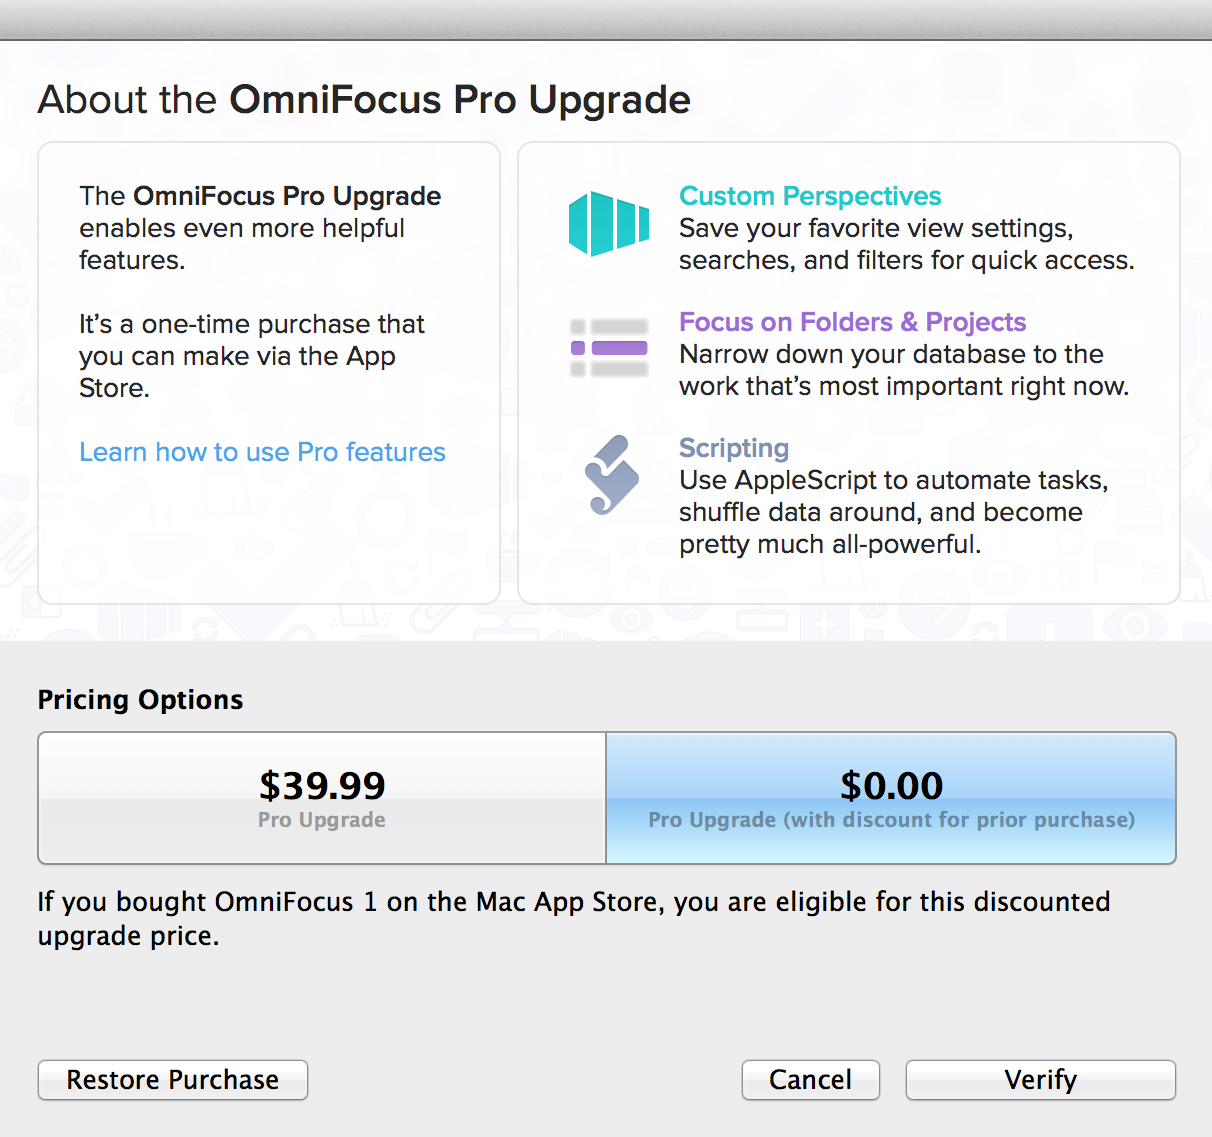 About the OmniFocus Pro Upgrade